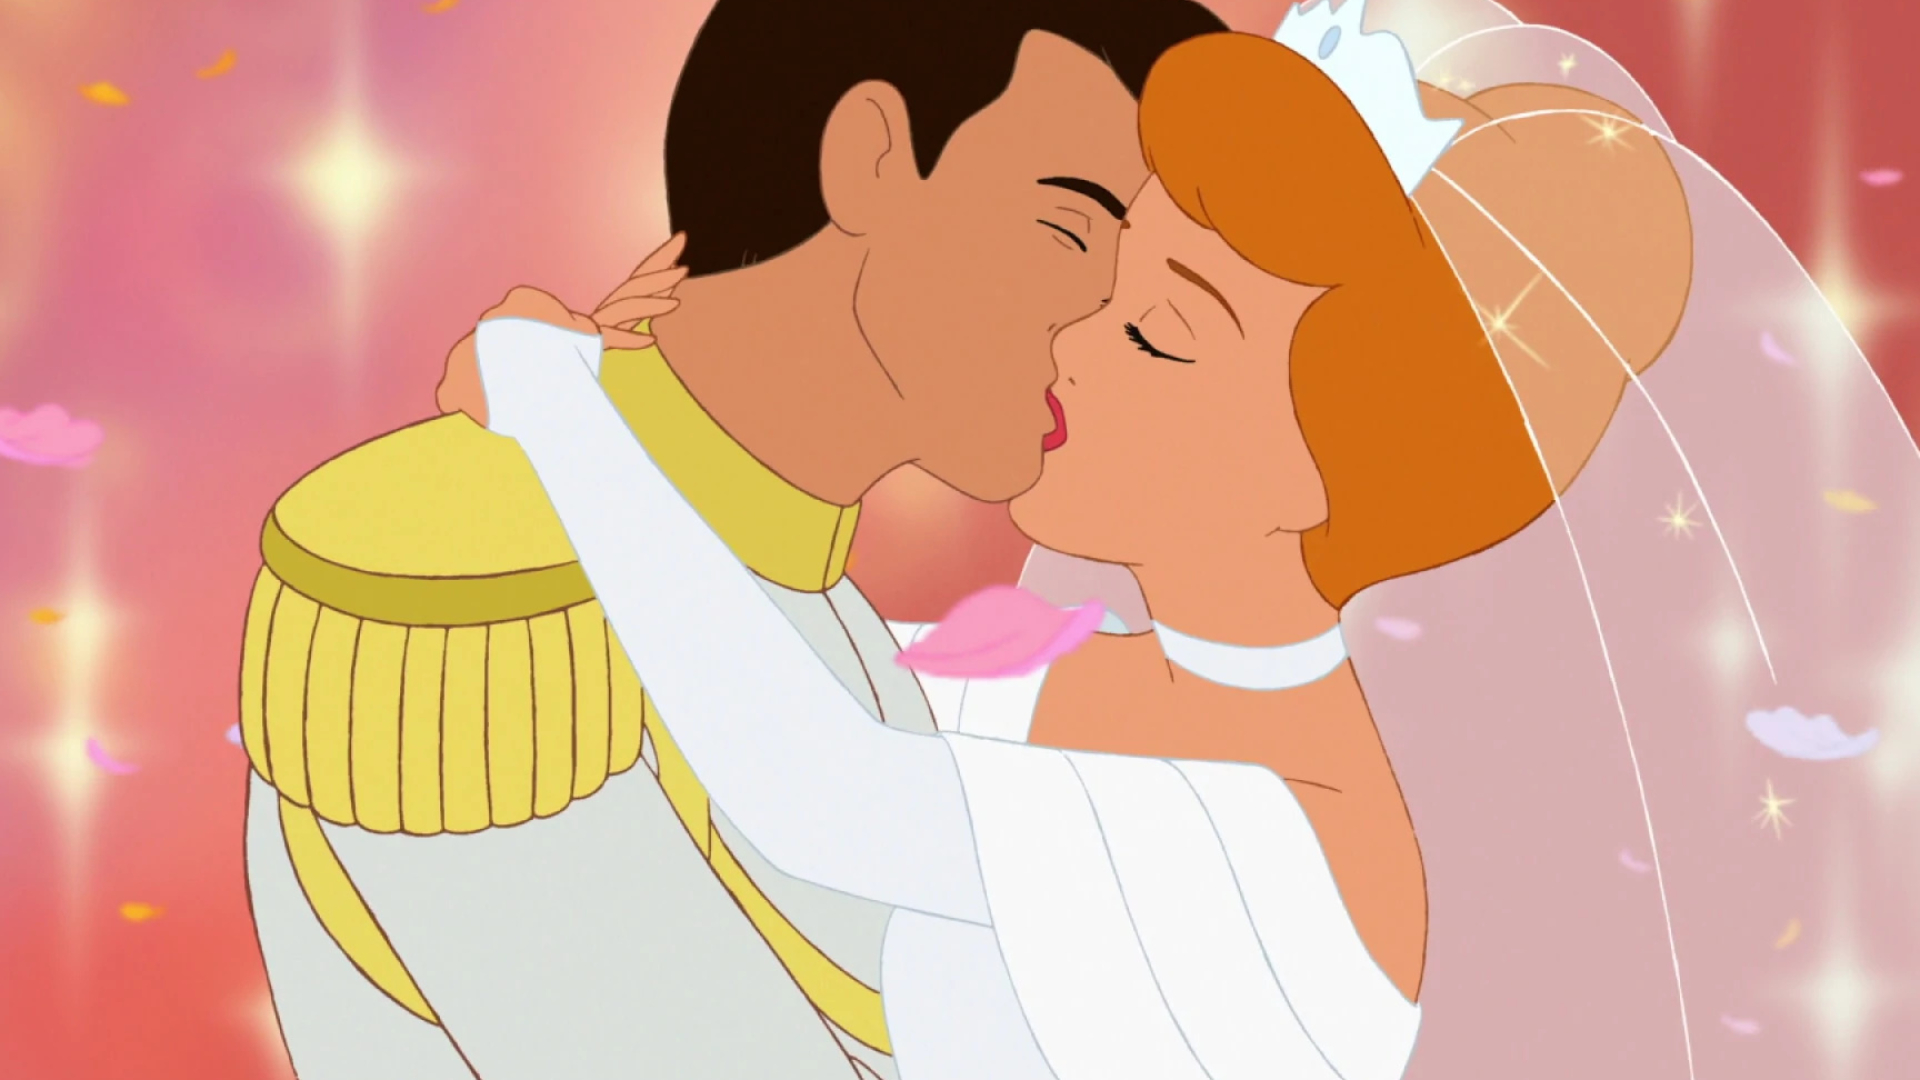 Prince Charming, Disney Wiki, Animated character, Beloved fairy tale, 1920x1080 Full HD Desktop